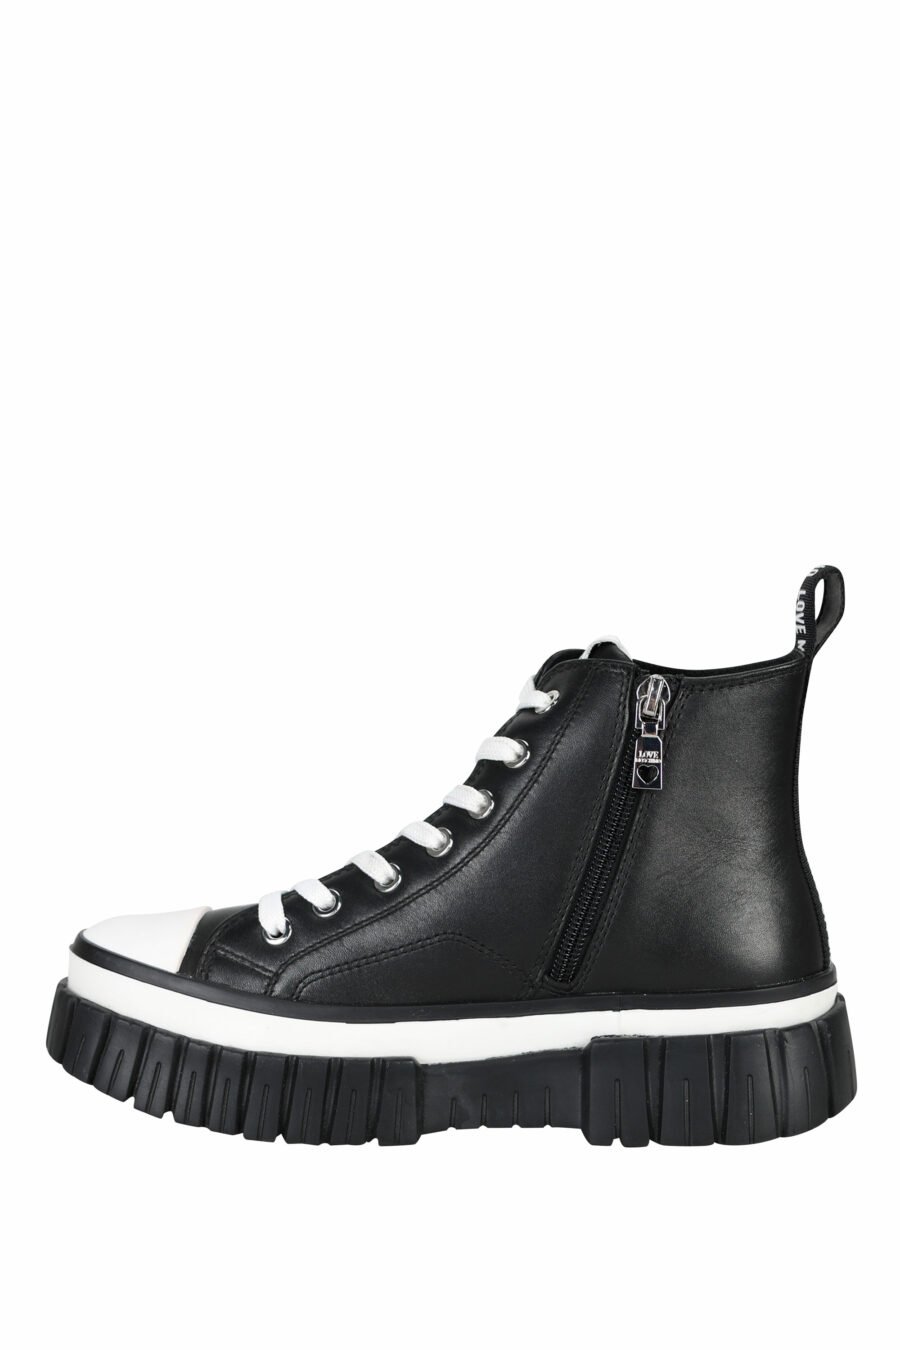 Black ankle boots with white laces and mini-logo - 8050142937599 2